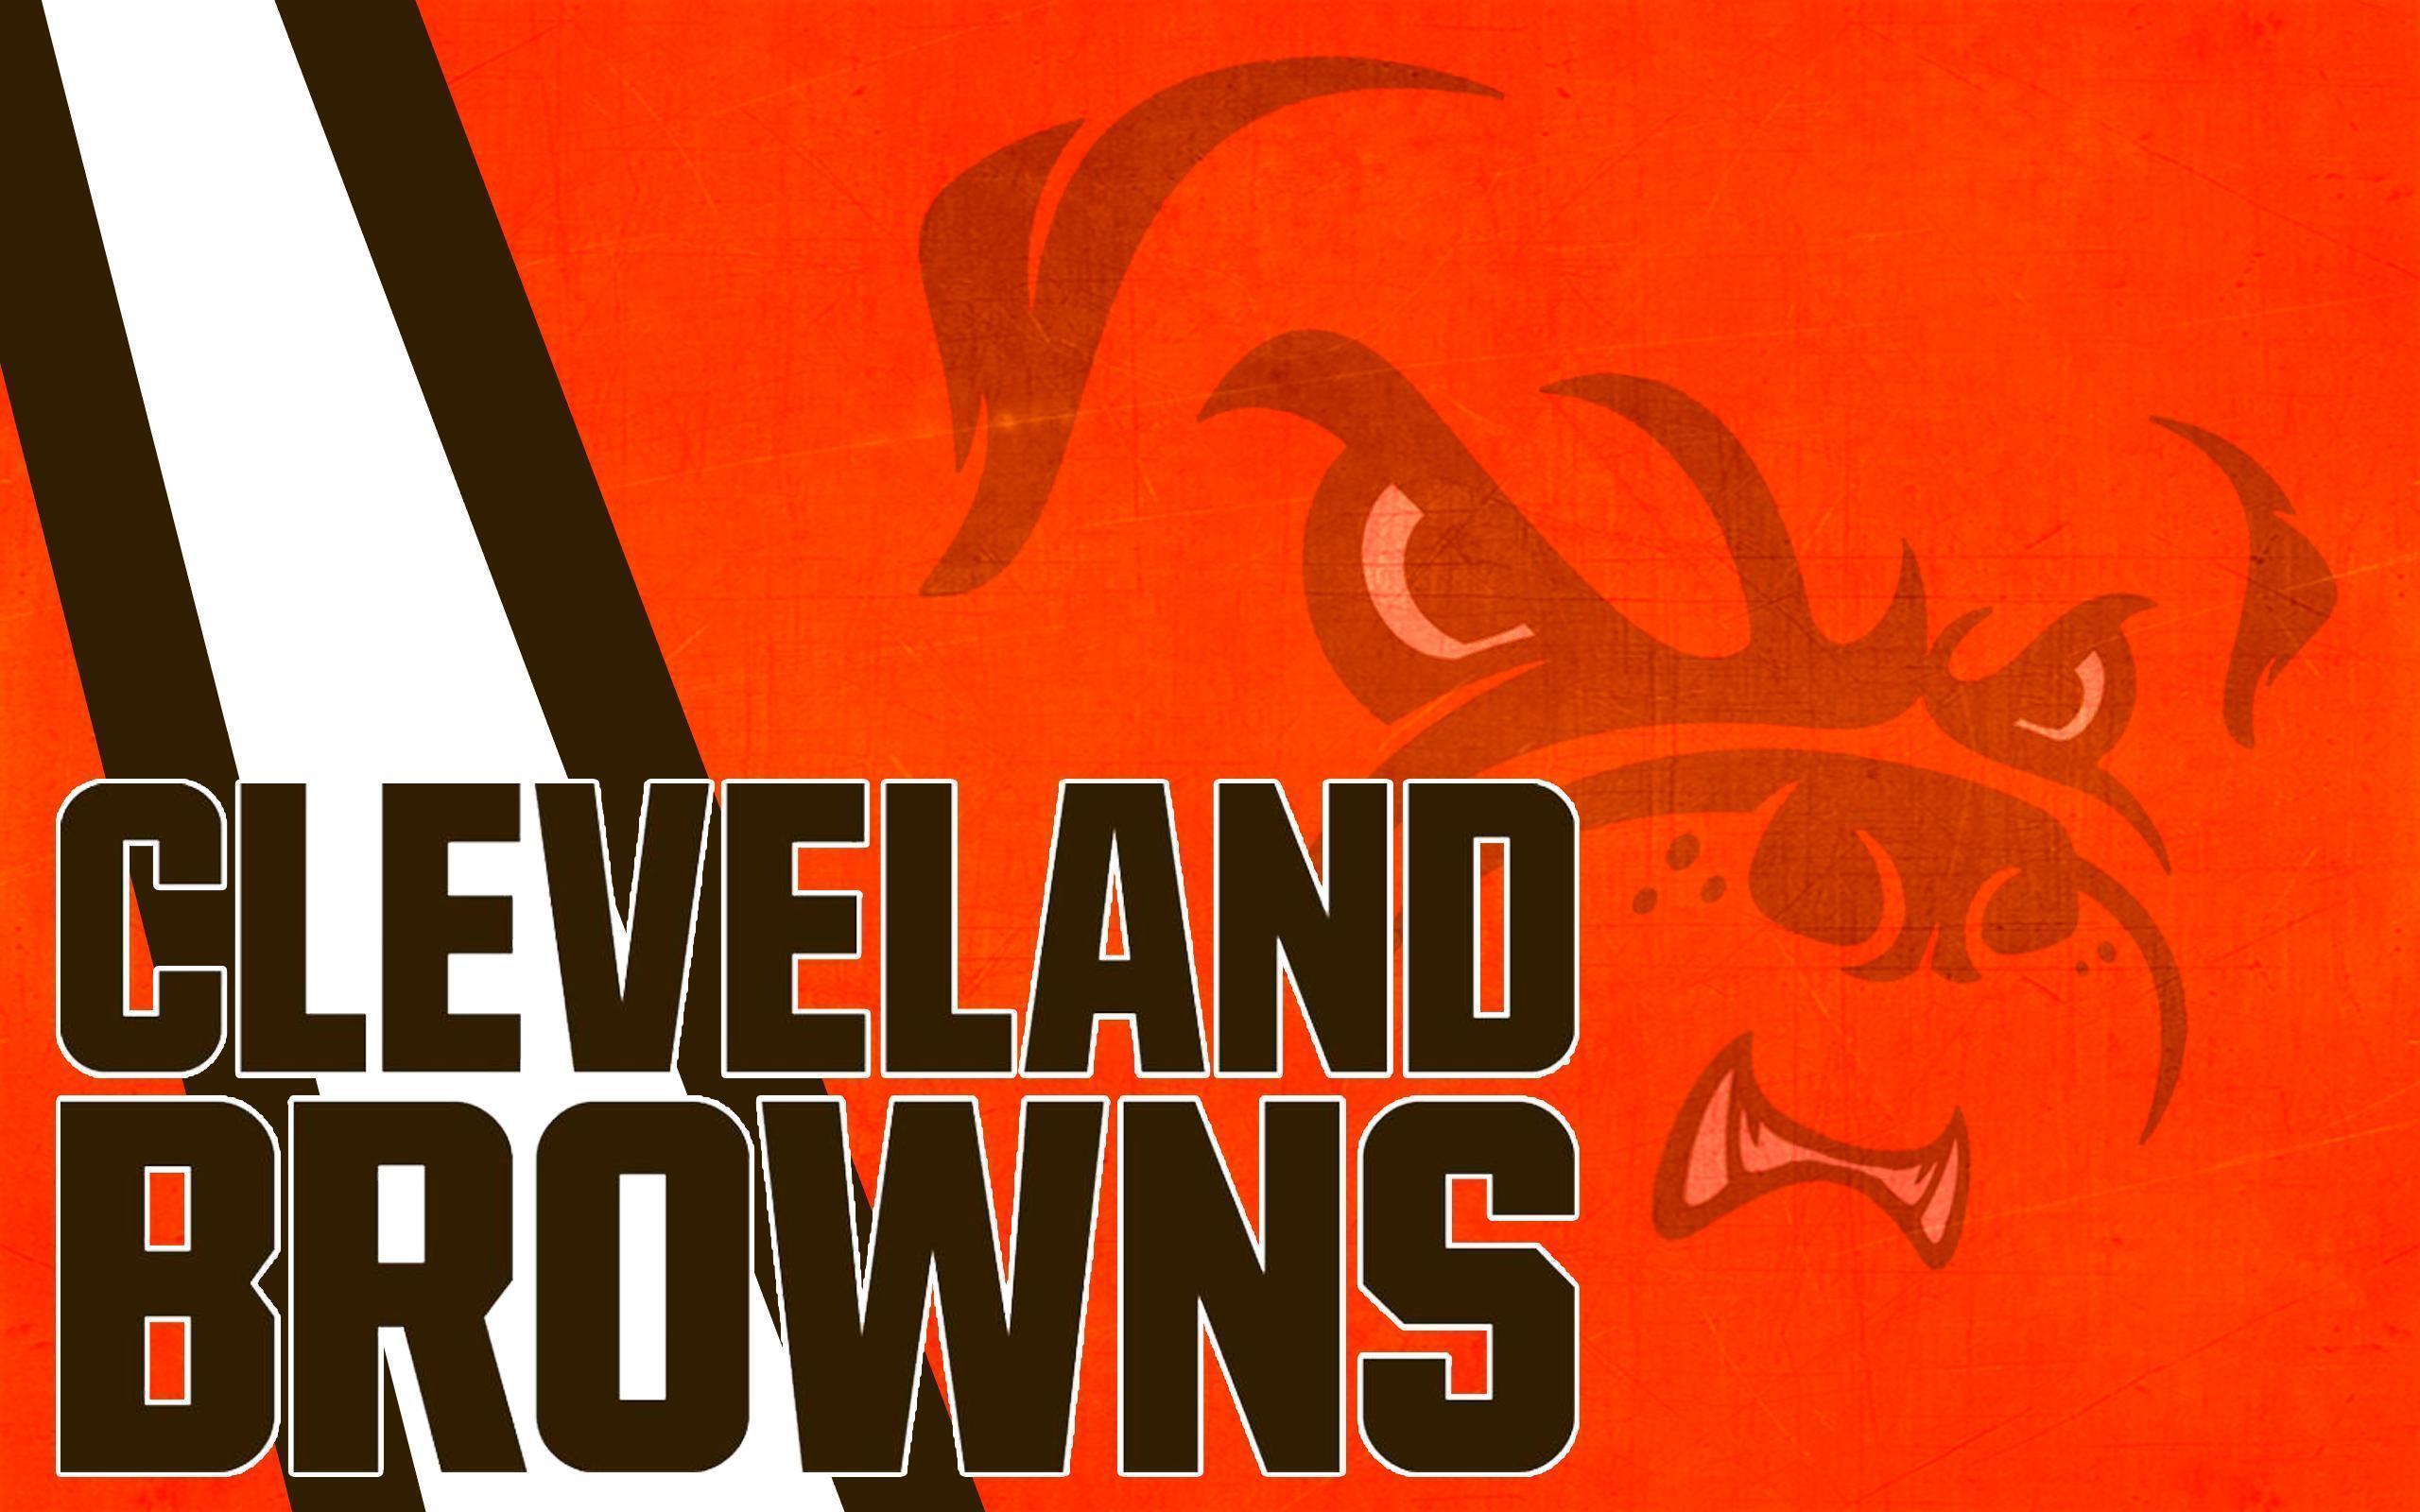 Cleveland Browns Wallpaper HD. Wallpaper, Background, Image